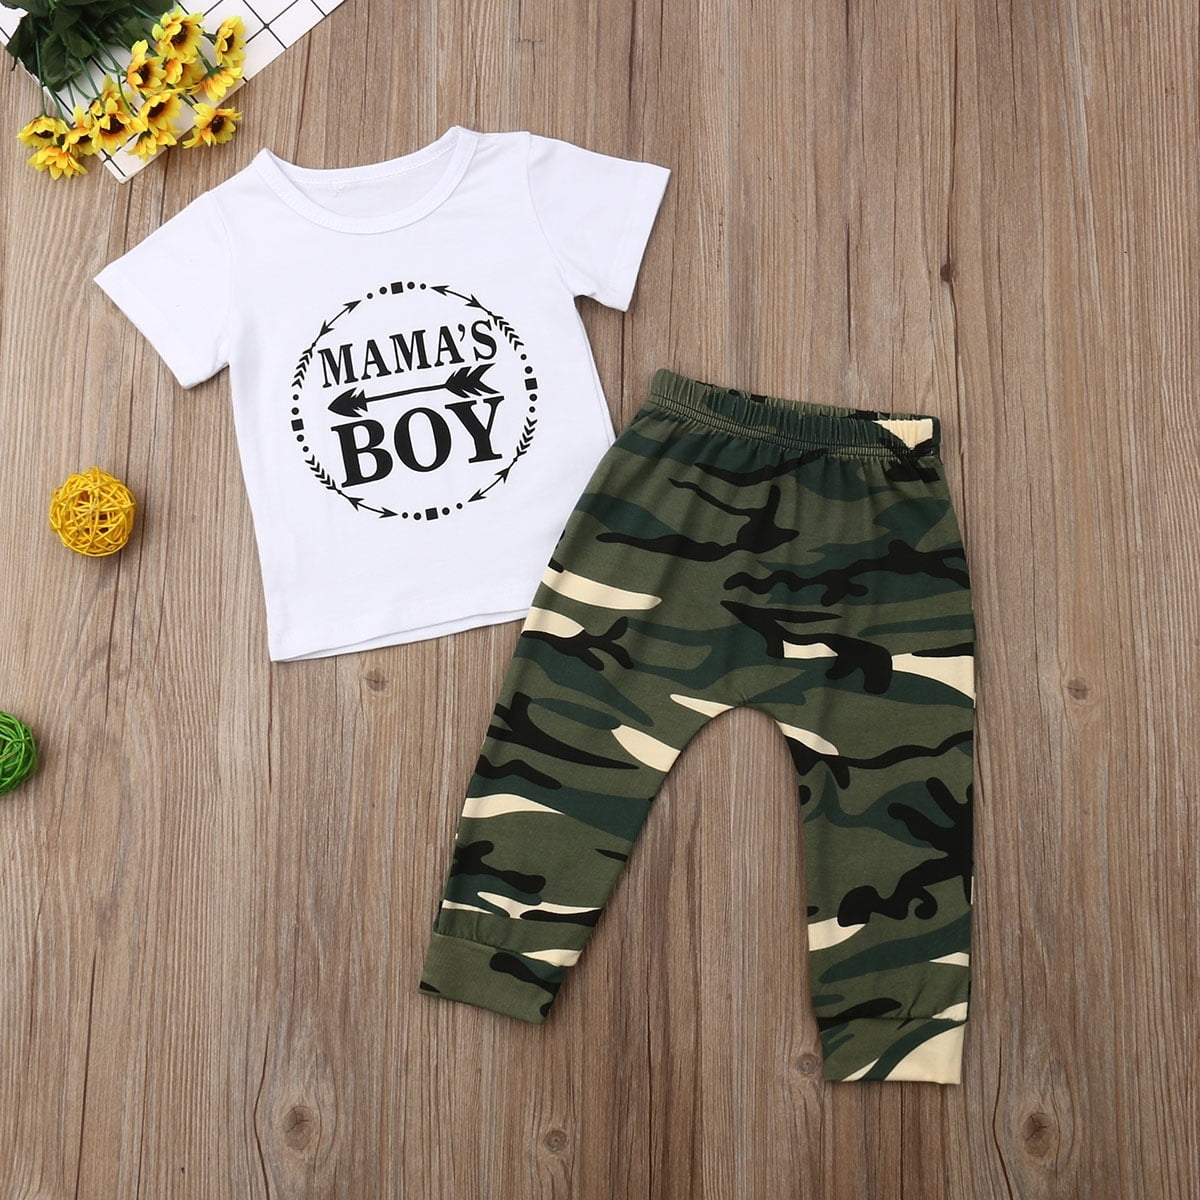 Toddler Infant Kids Baby Boys Tops T-shirt Camouflage Pants Trousers Outfits Set 